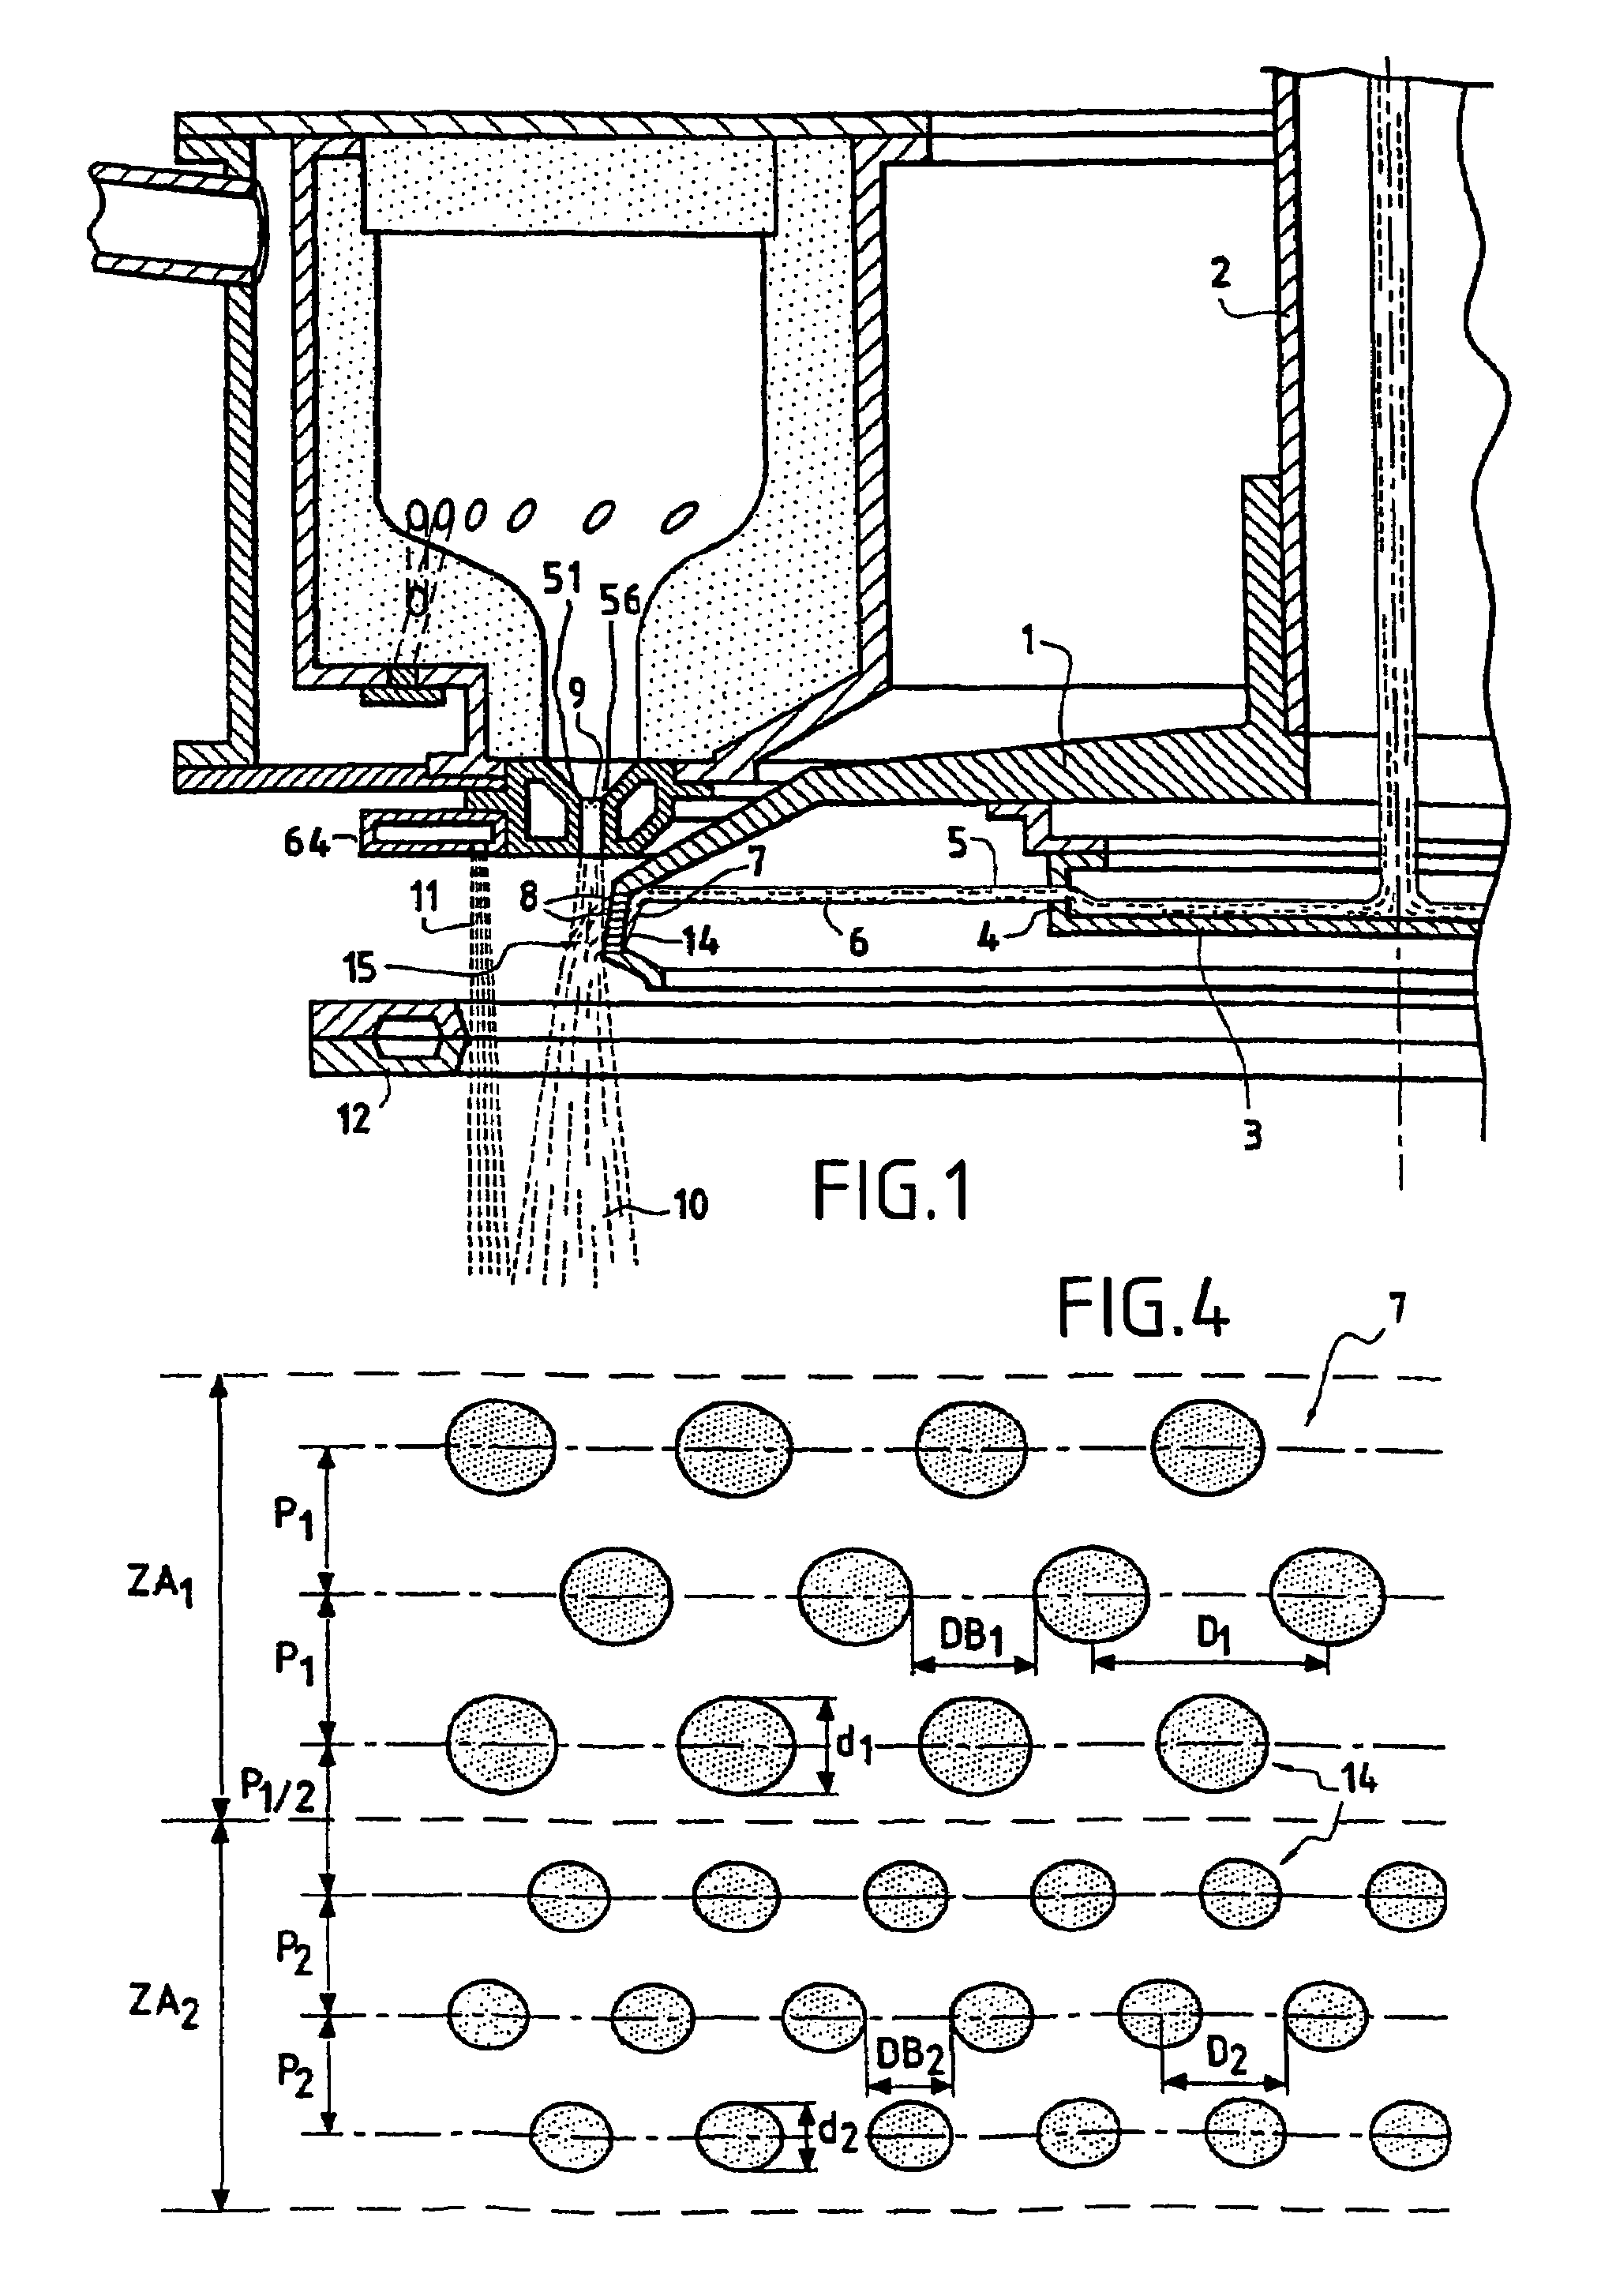 Process and device for formation of mineral wool and mineral wool products